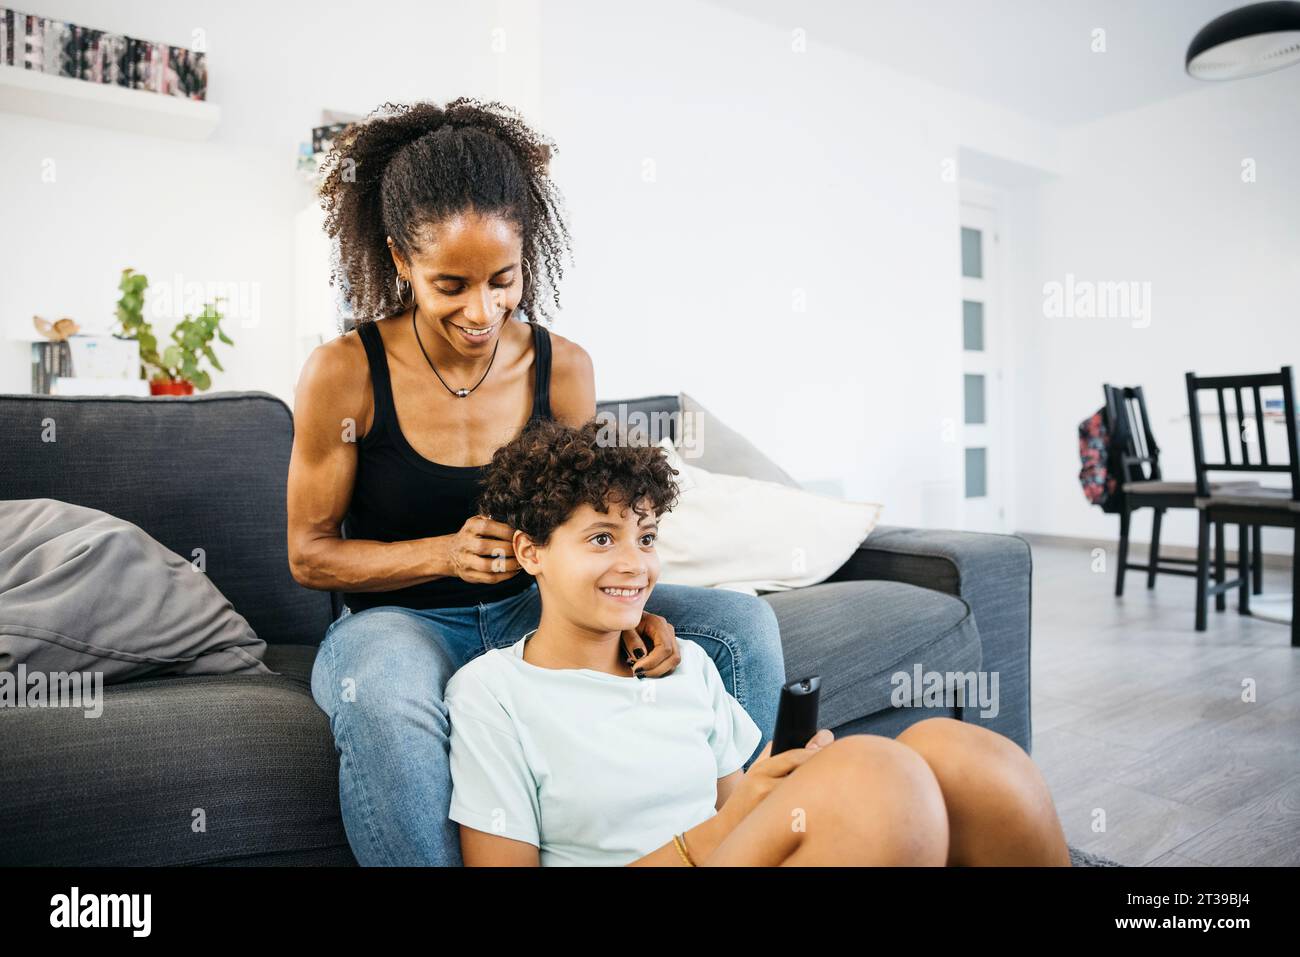 Young smiling mother combing her daughter on a sofa while watching tv. Mother and daugther spending time together infront of the tv. Stock Photo